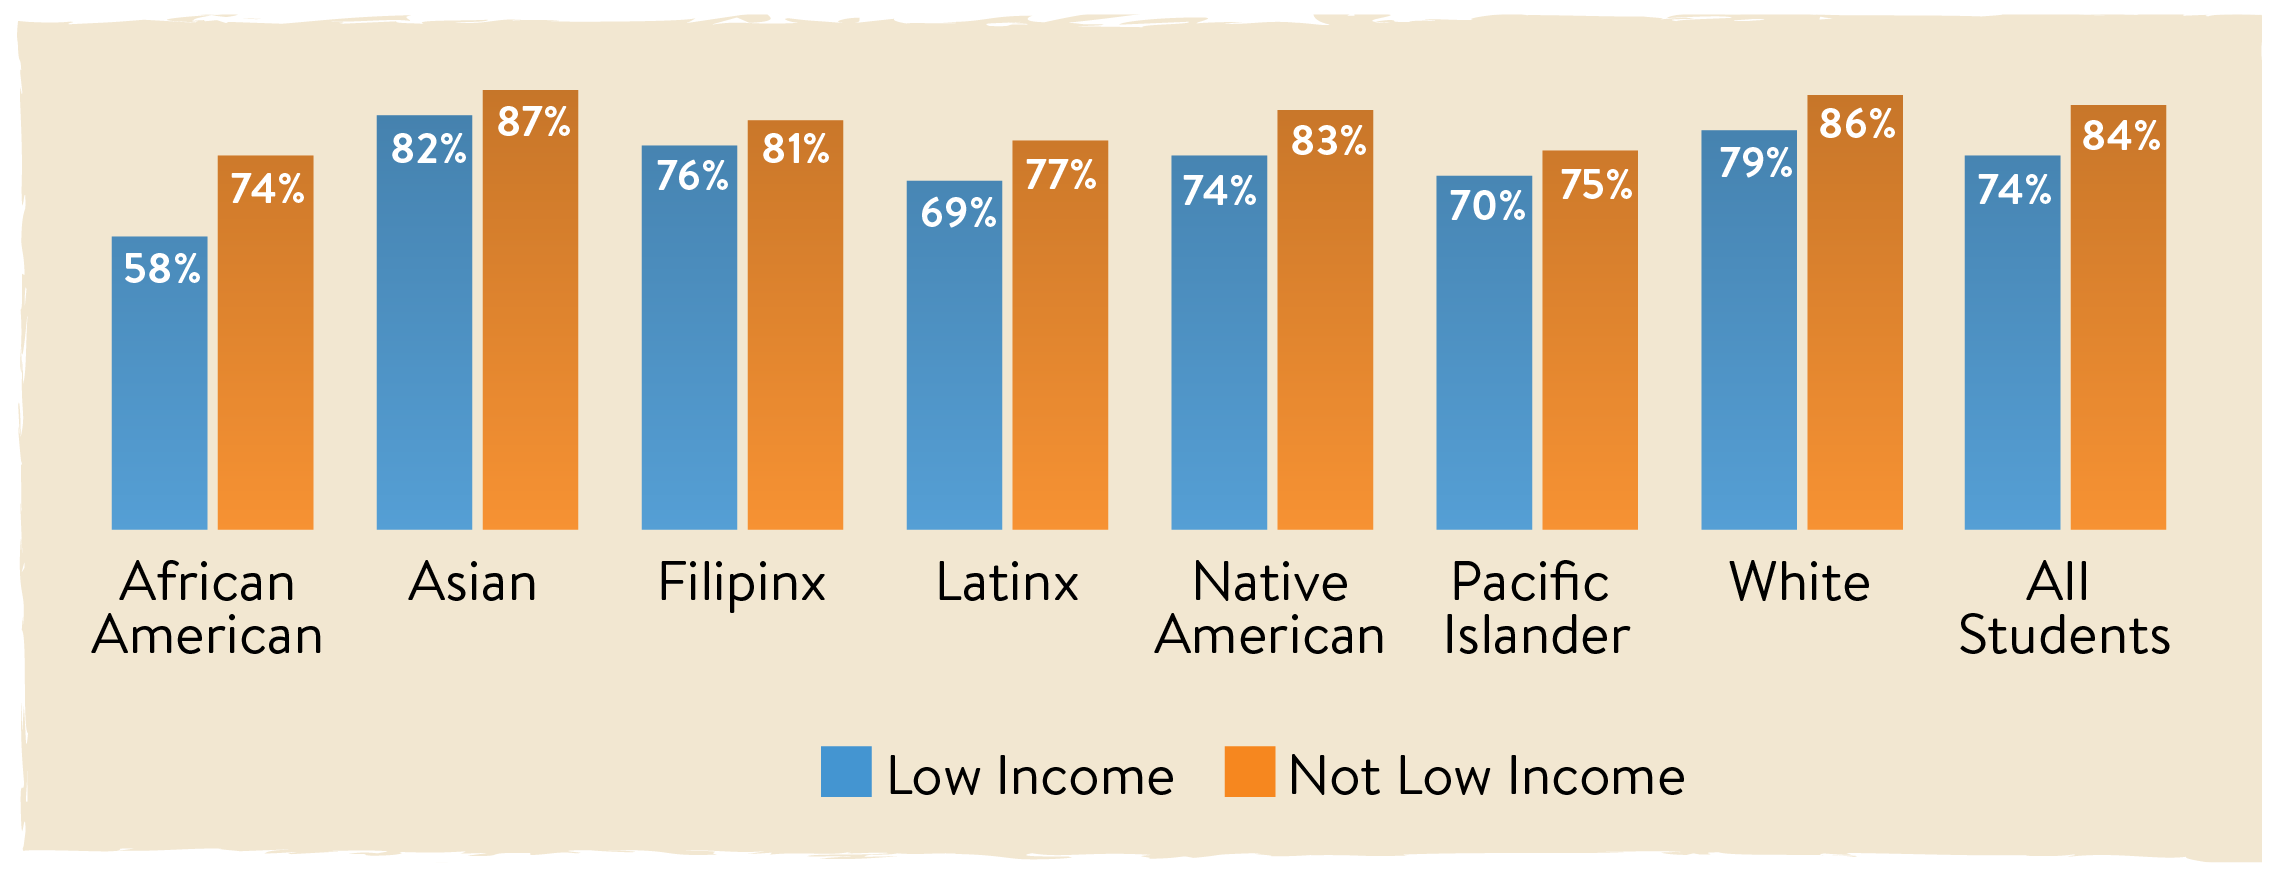 2019-20 Course Completion by Ethnicity and Low Income Status. Showing that lower income and some ethnic groups such as African Americans and LatinX students how lower course completion rates.